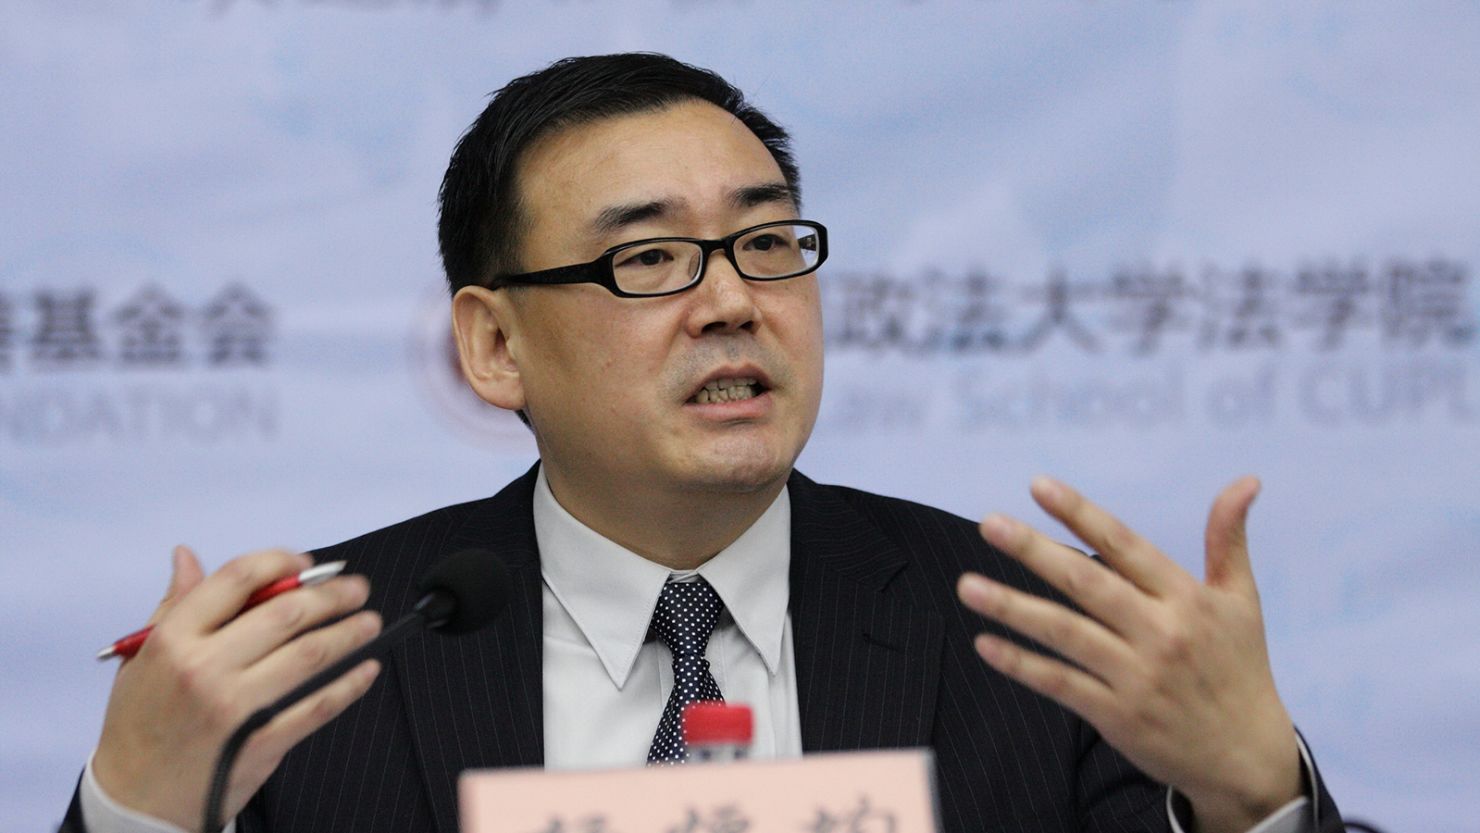 Chinese-Australian writer Yang Hengjun attends a lecture at Beijing Institute of Technology in Beijing, China on 18 November 2010.